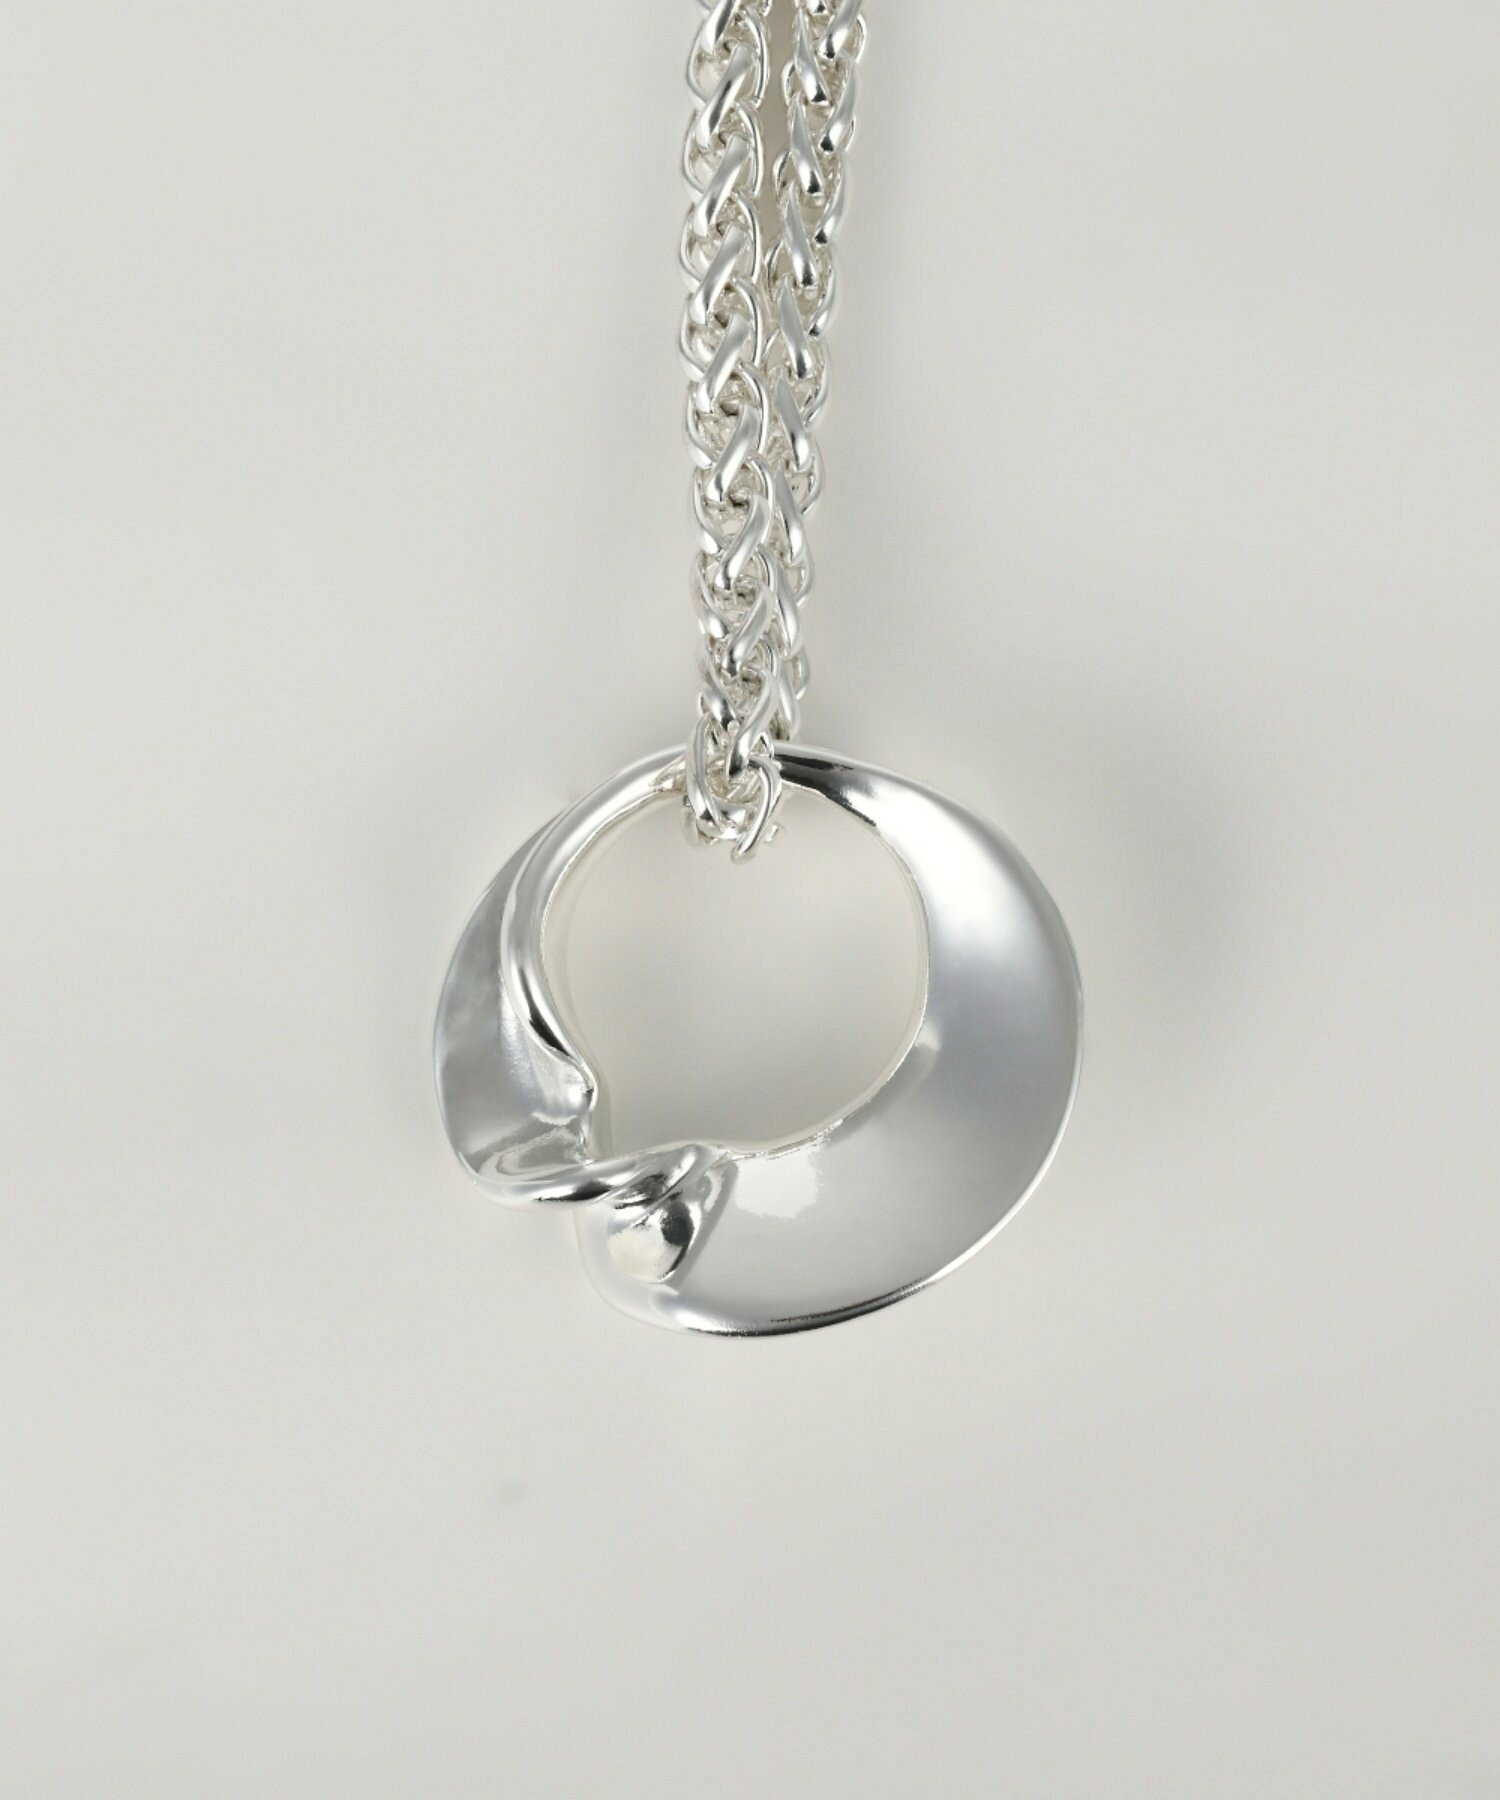 Nothing And Others/Asymmetry twist ring Necklace